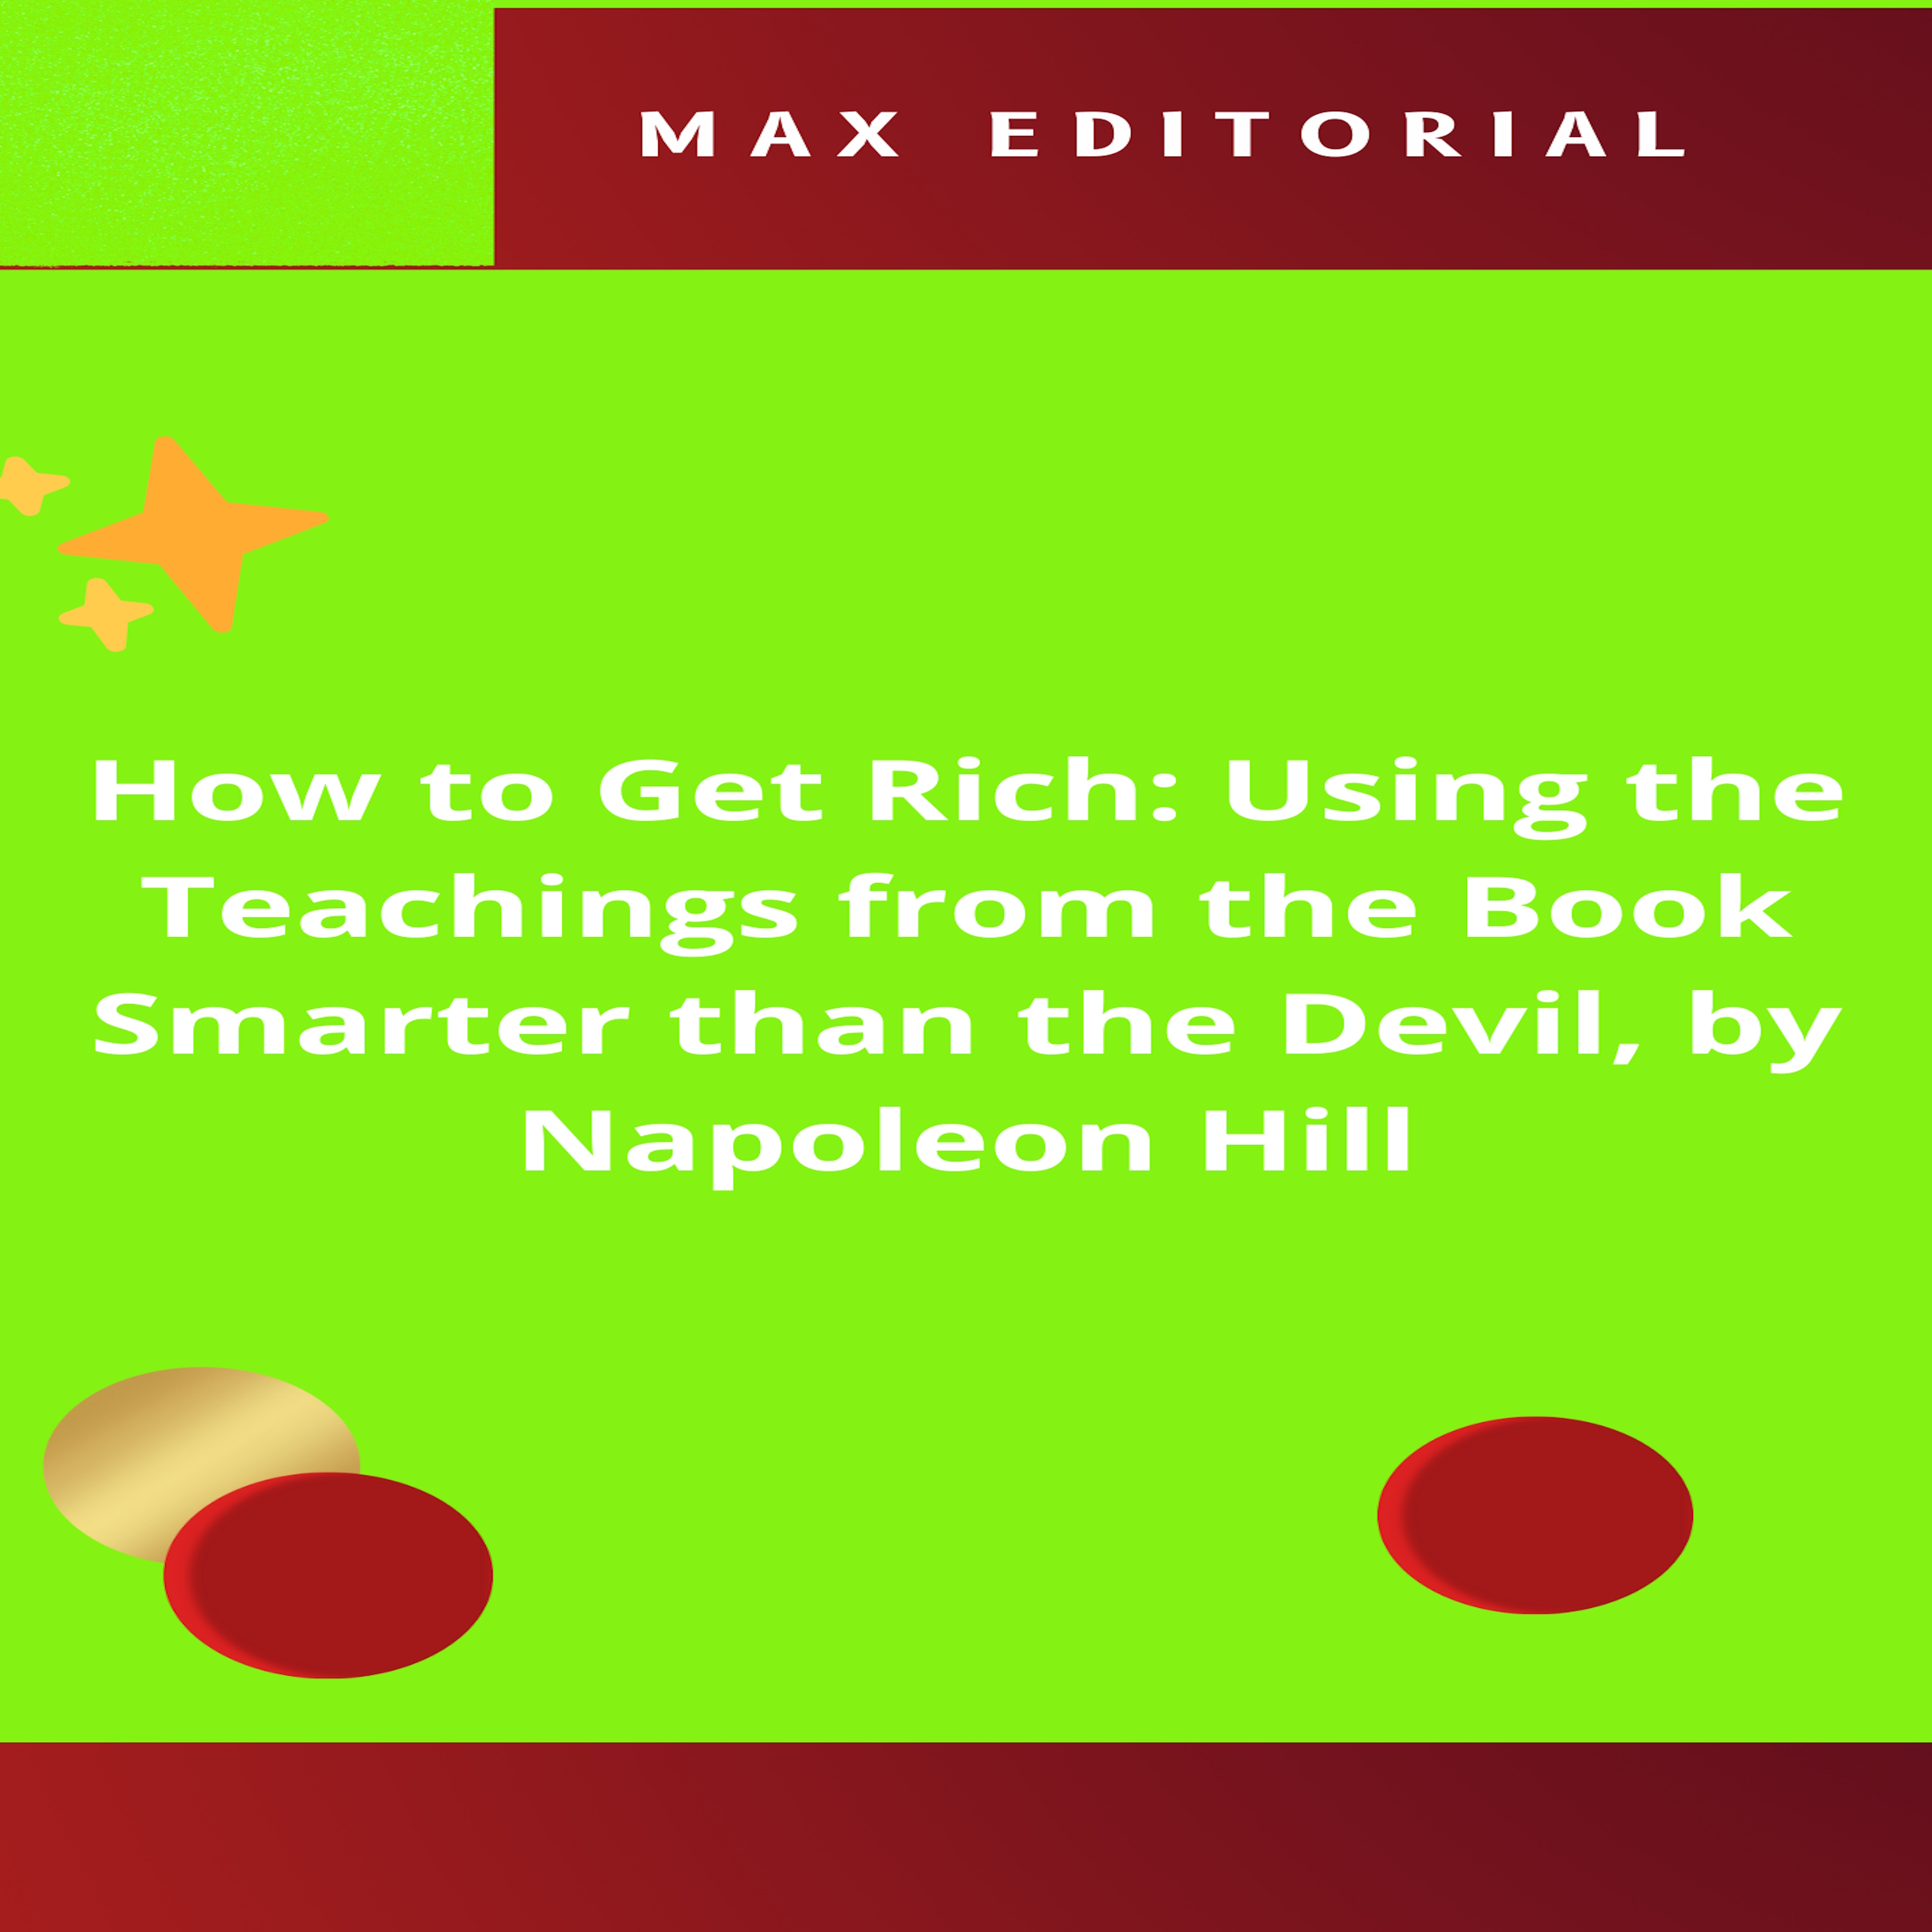 How to Get Rich: Using the Teachings from the Book Smarter than the Devil, by Napoleon Hill